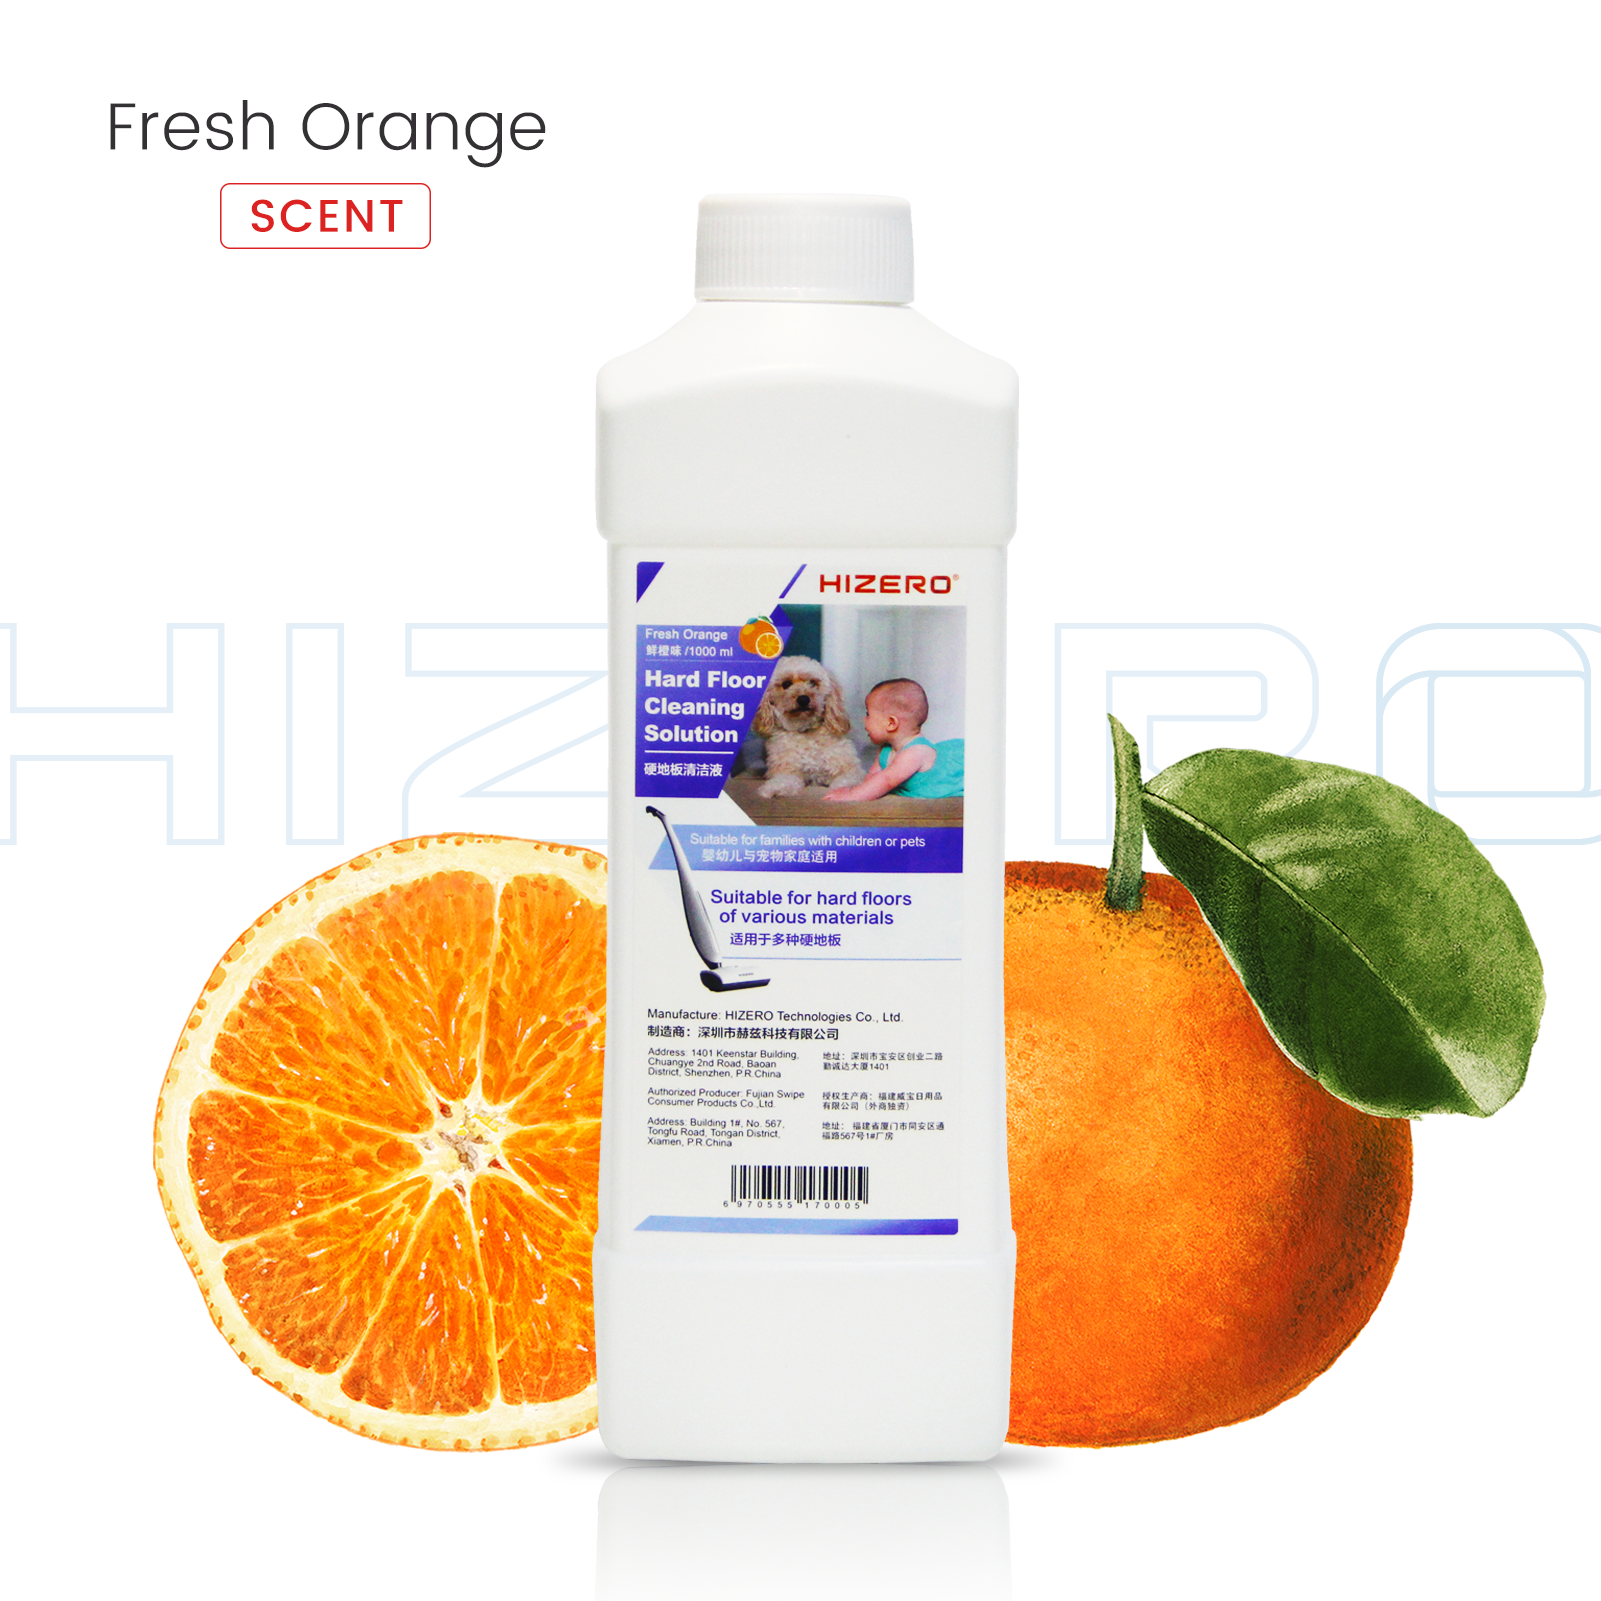 Hizero HygieneHero™ Cleaning Solution